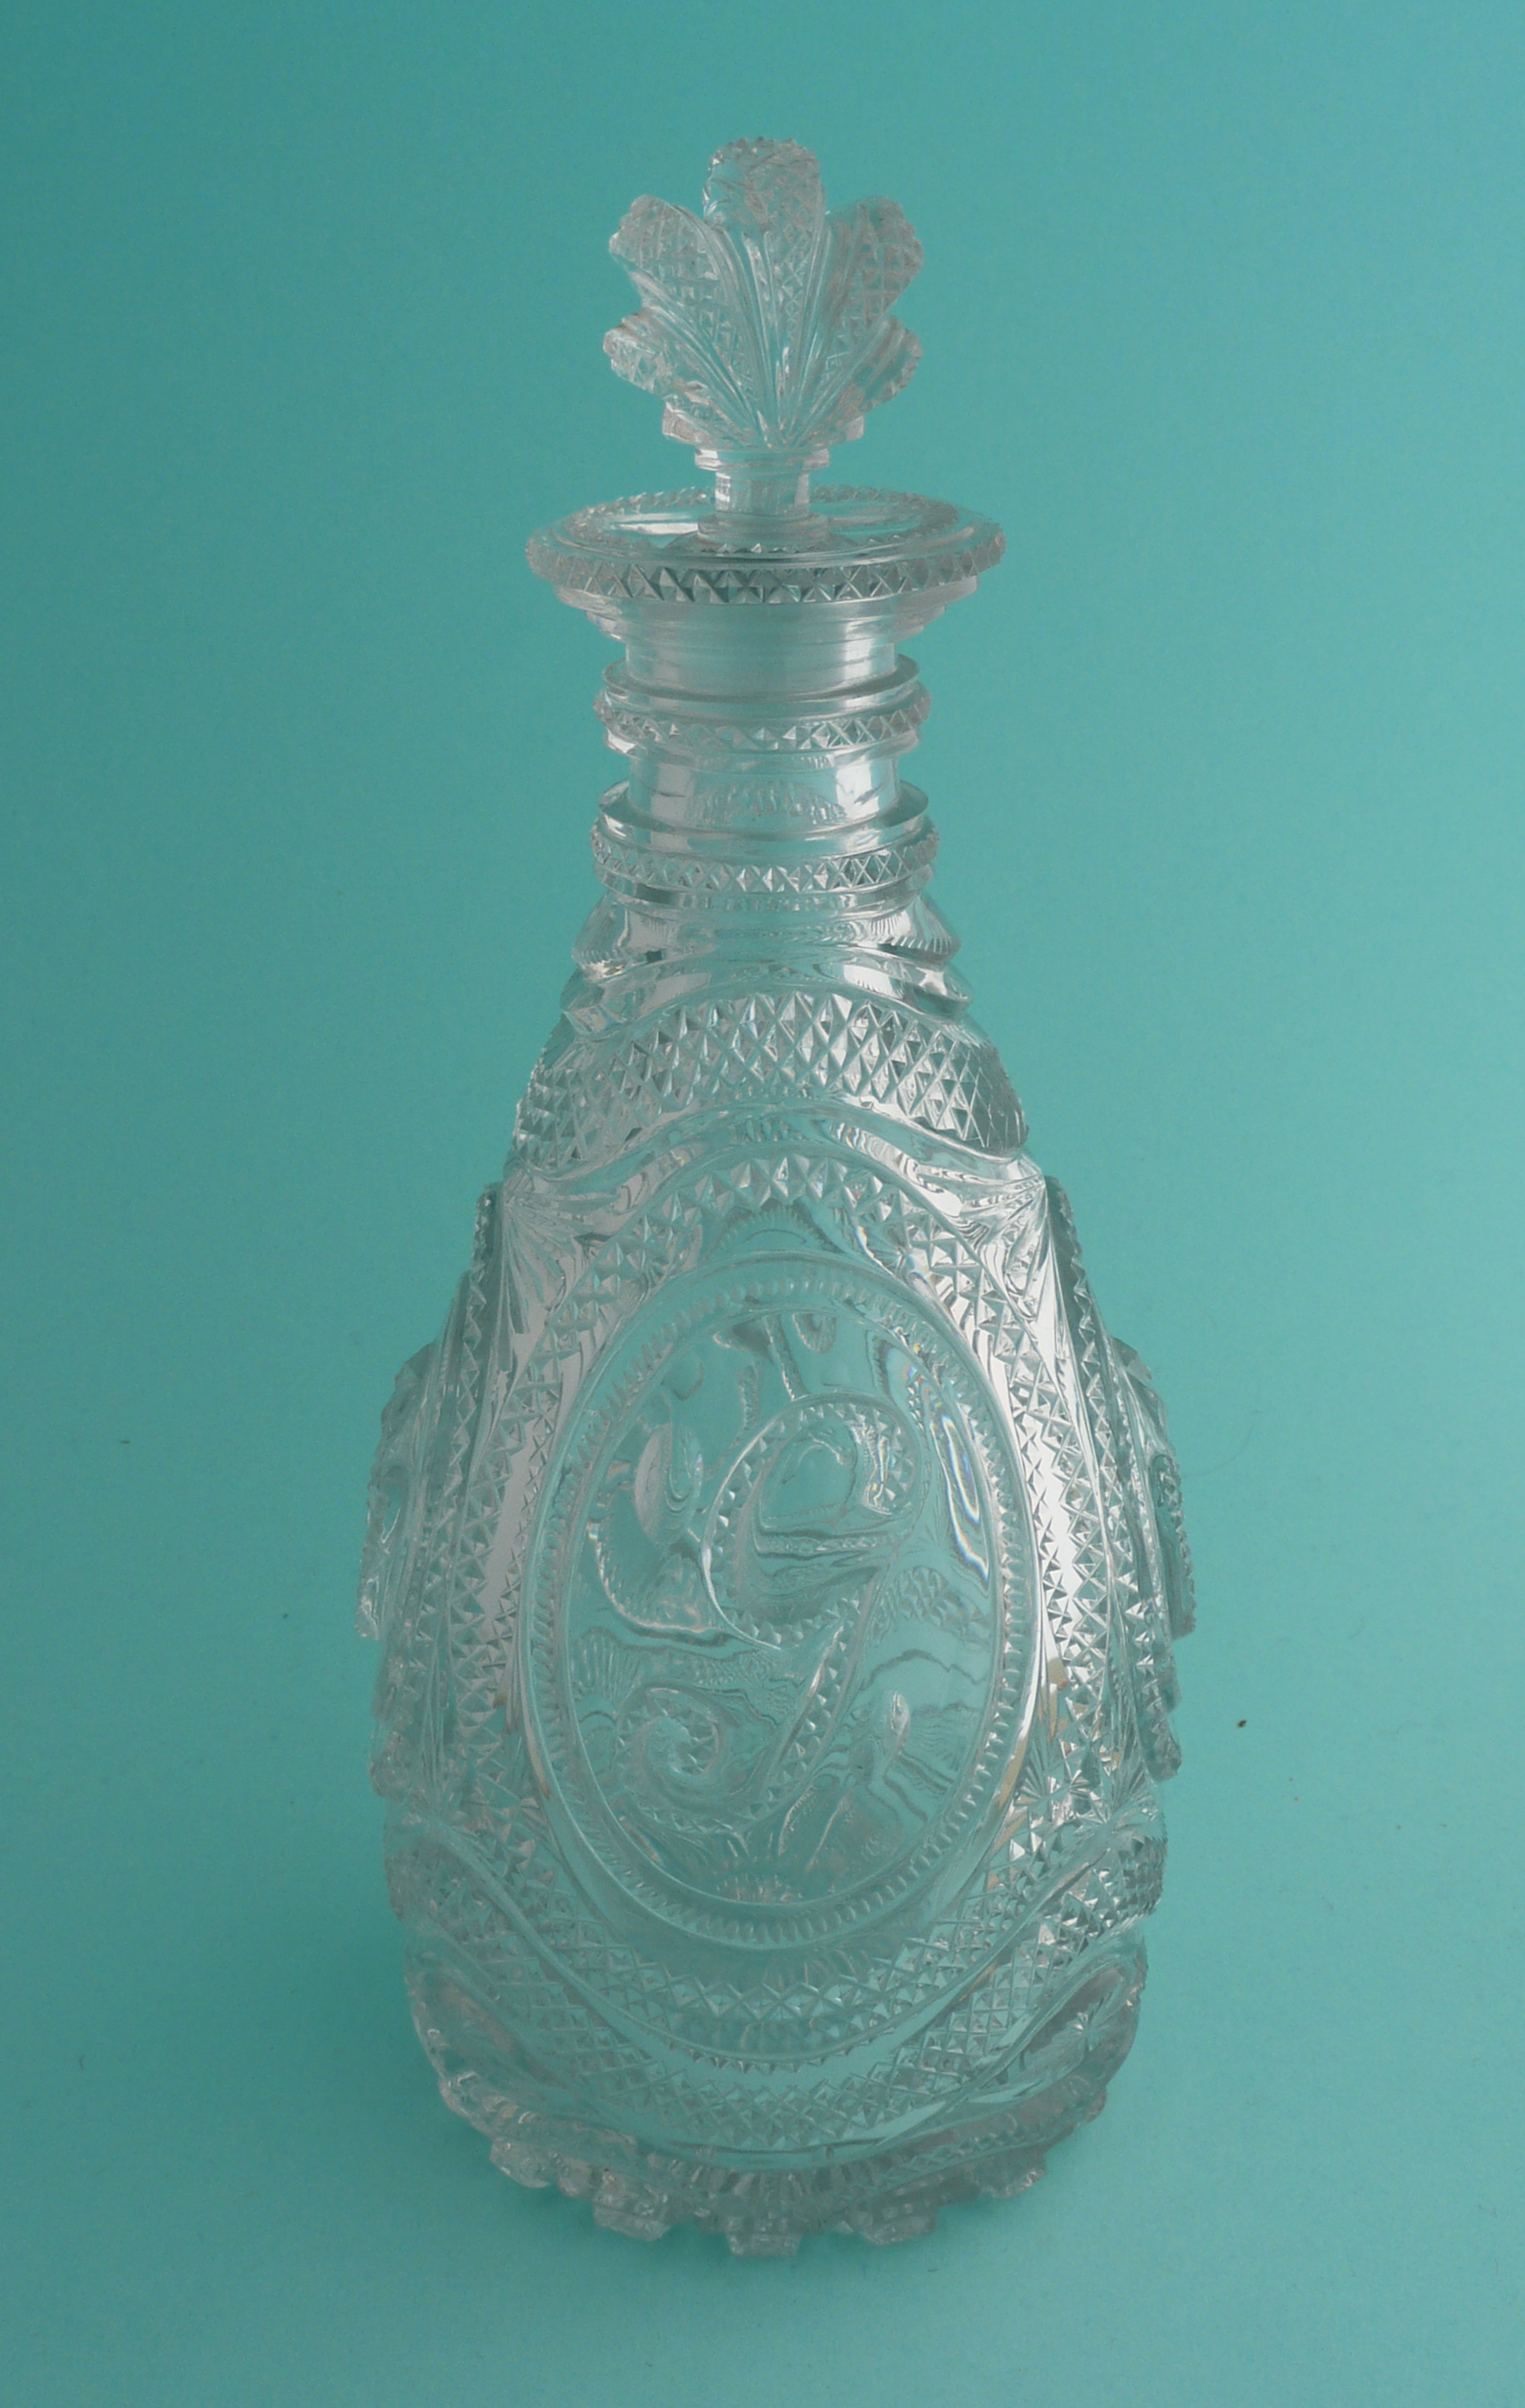 George, Prince of Wales: a fine quality and extraordinarily heavy Regency hobnail cut glass decanter